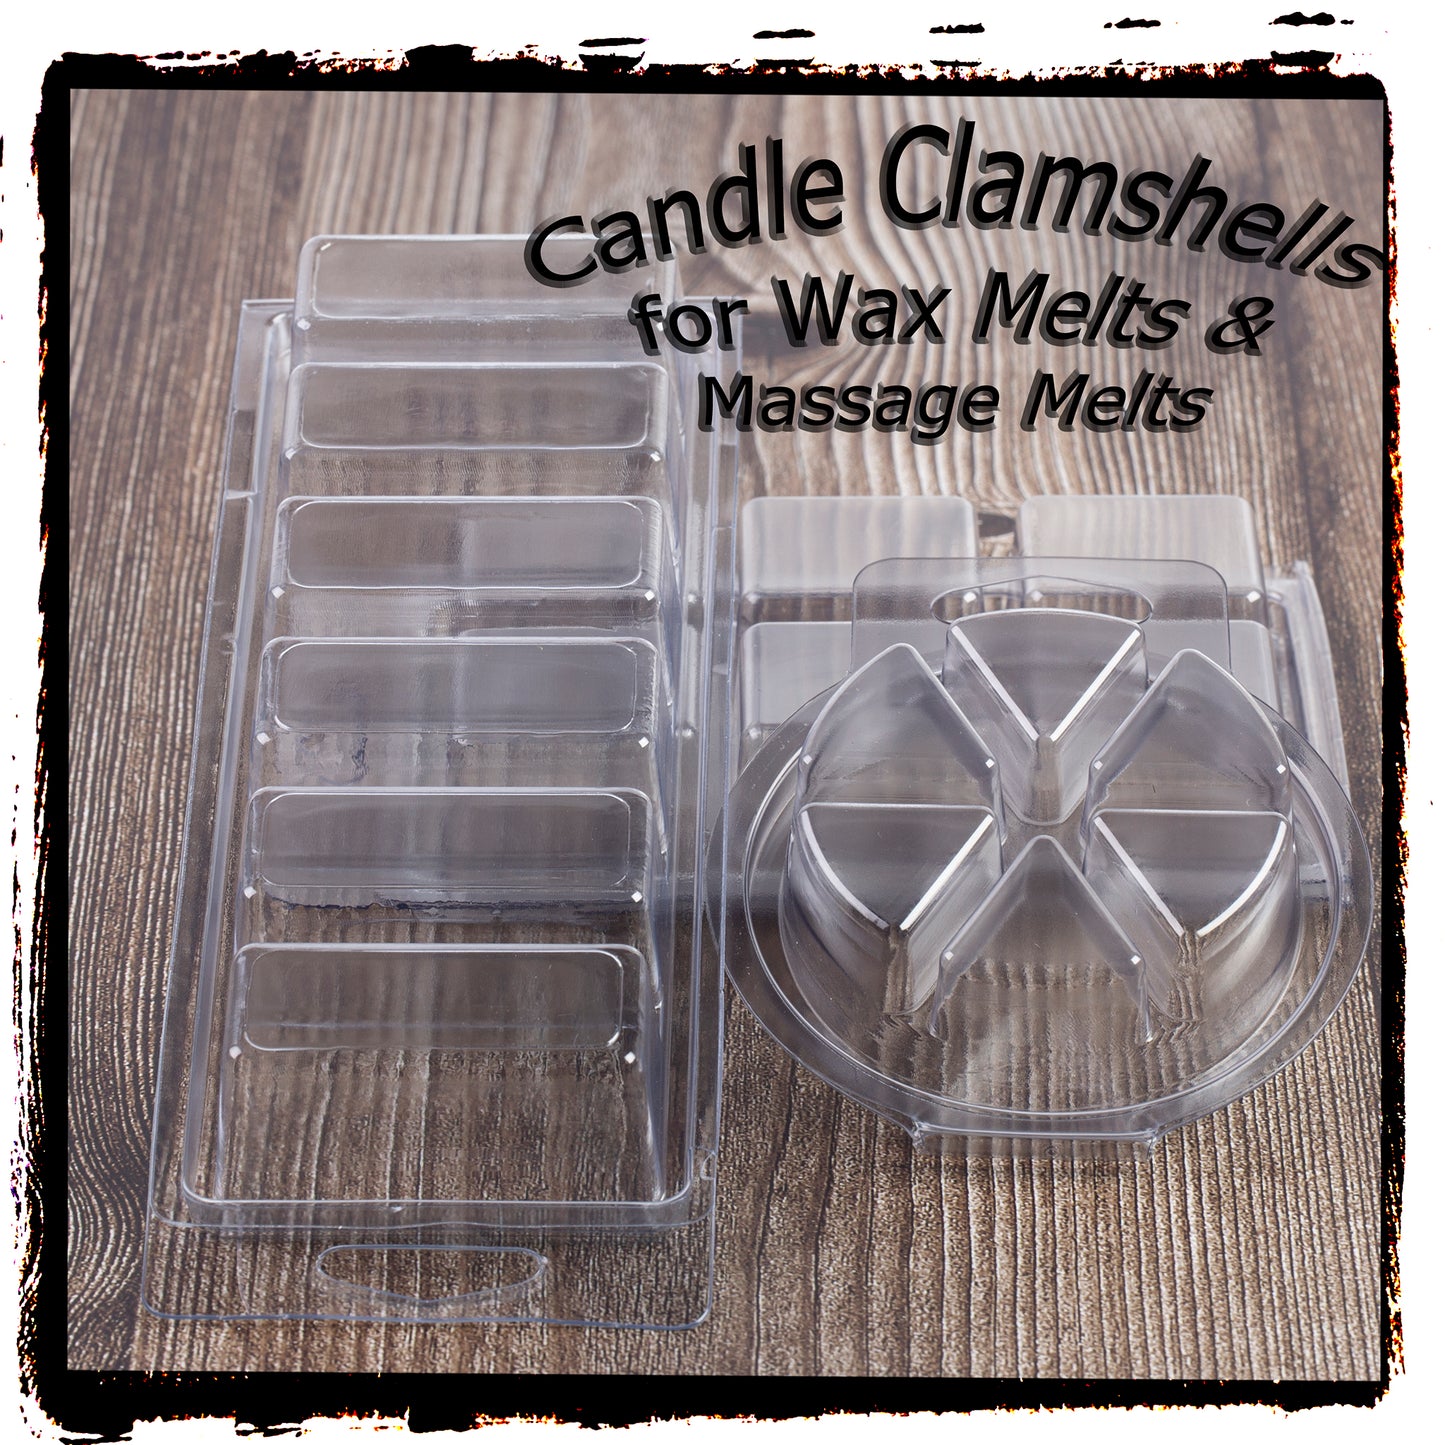 Plastic Candle Clamshell for Wax Melts